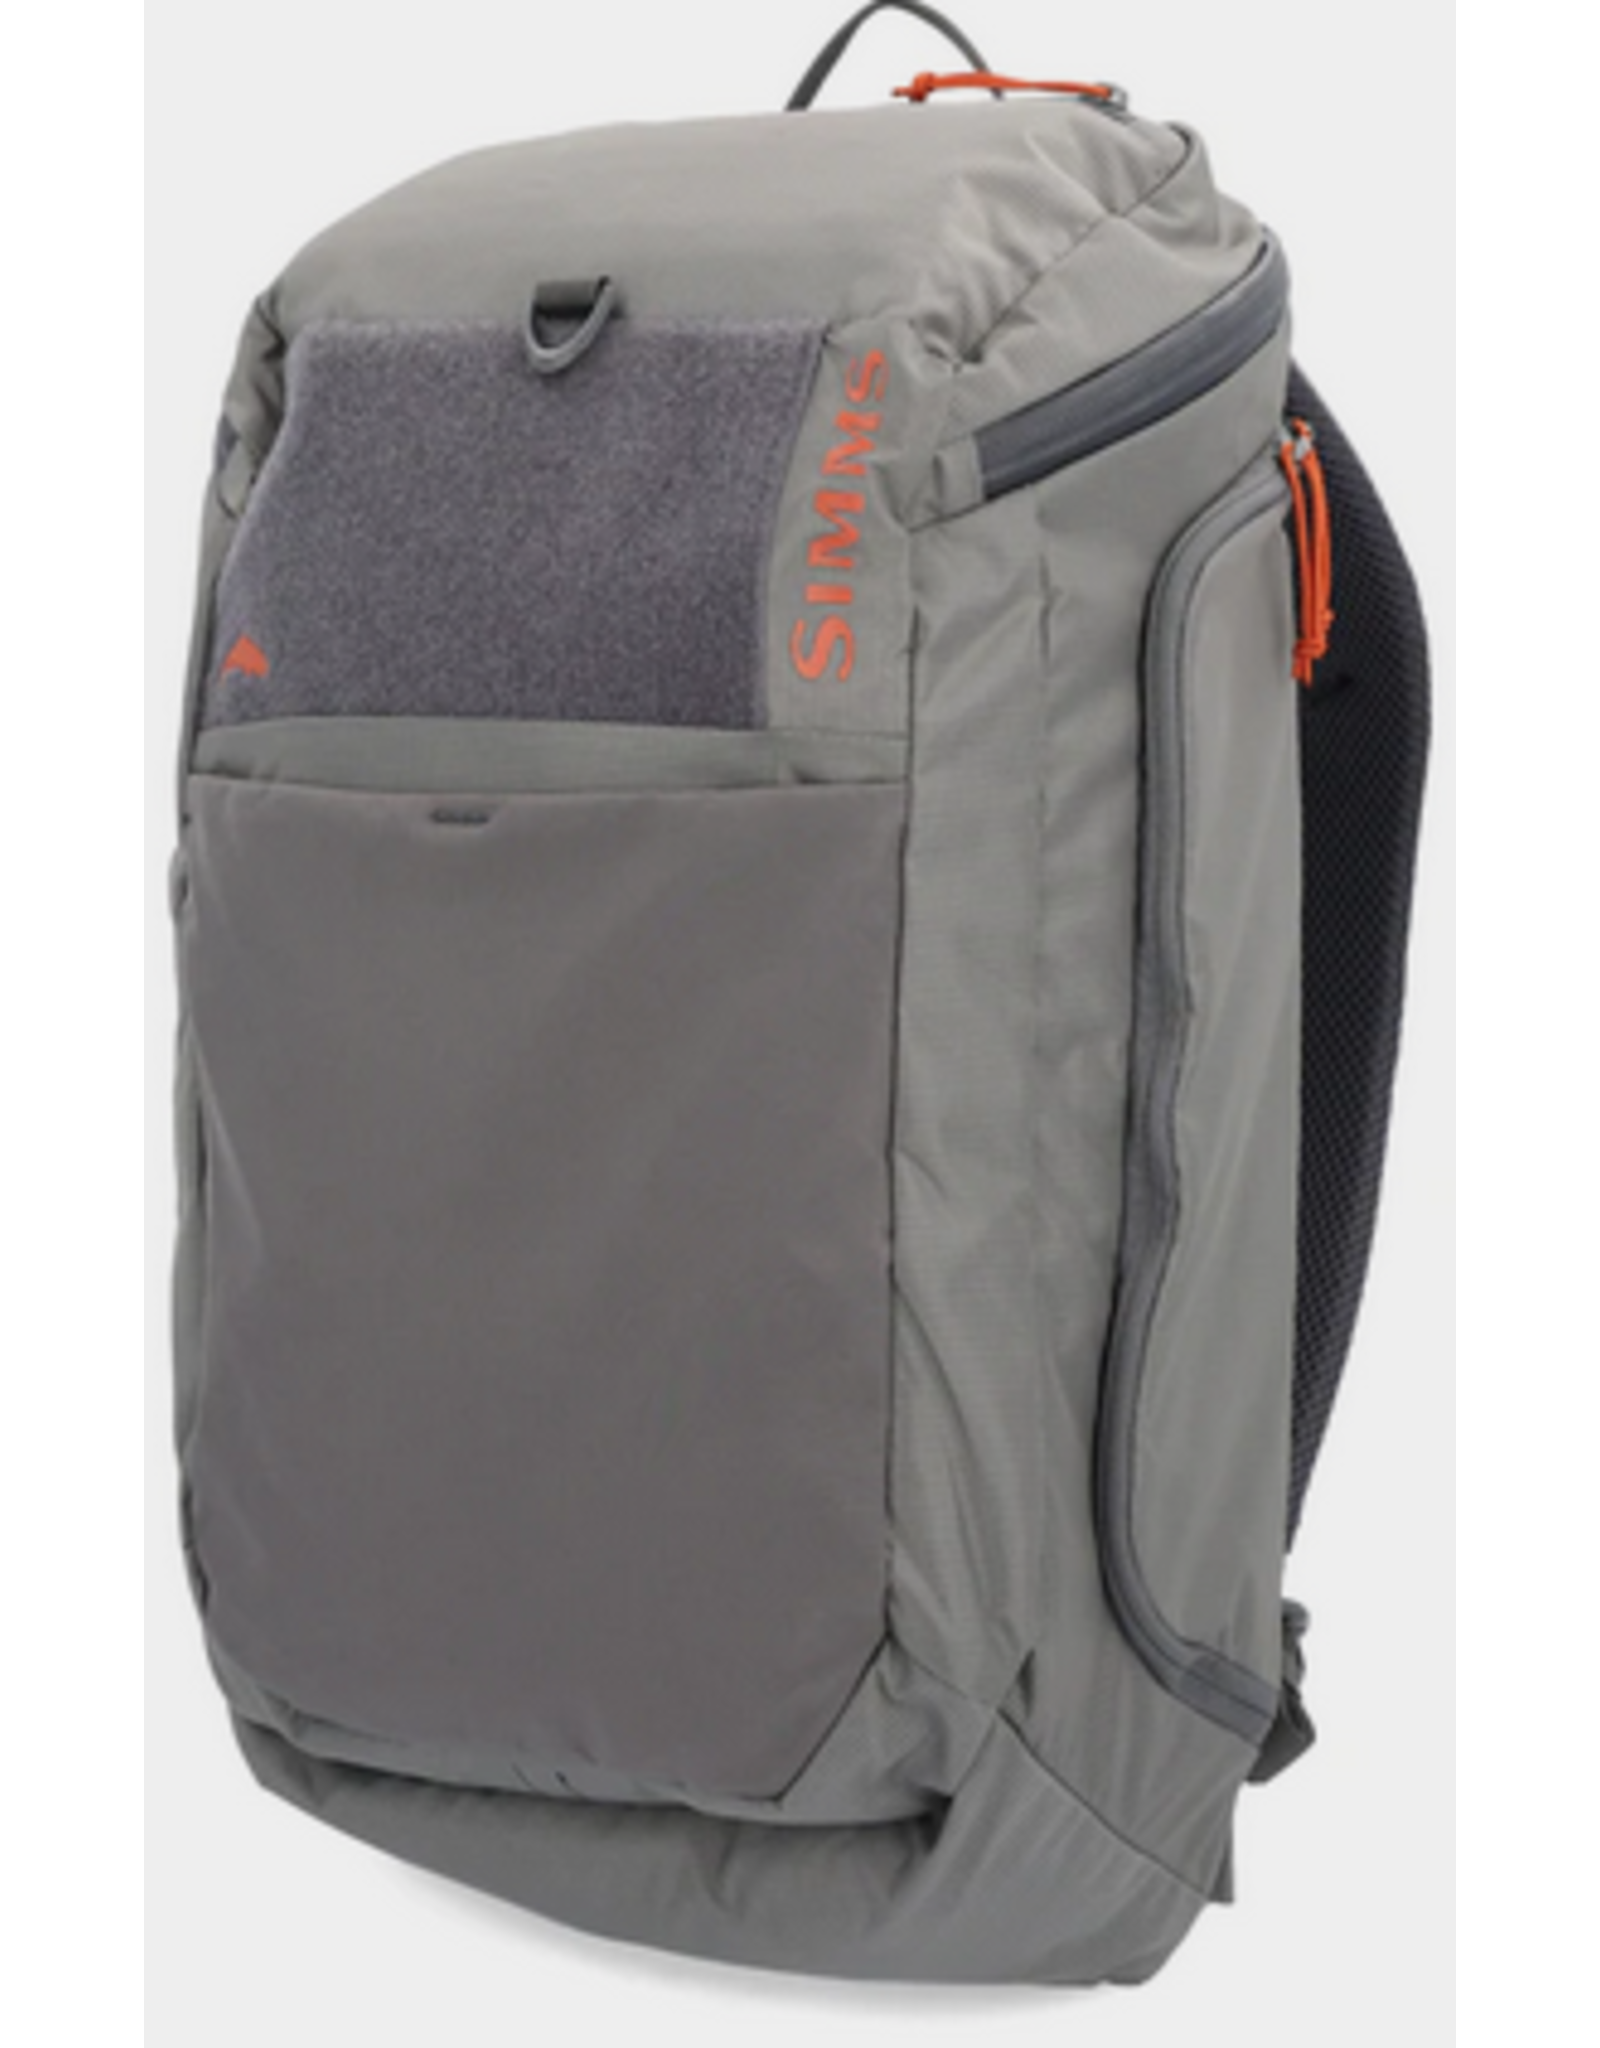 Simms Simms Freestone Backpack - Pewter